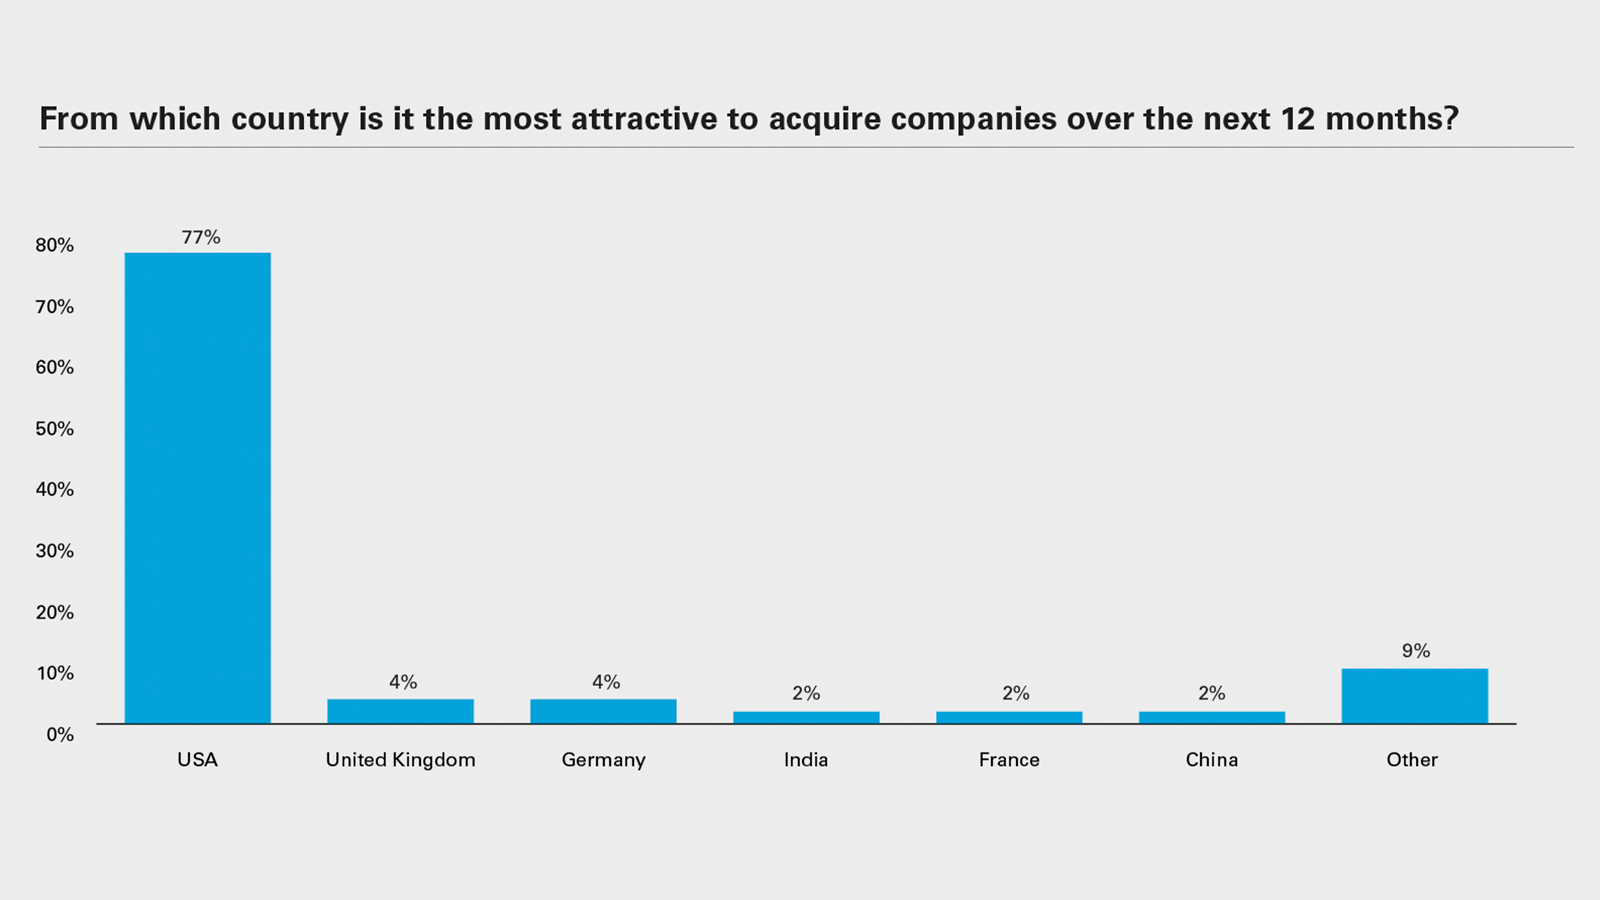 From which country is it the most attractive to acquire companies over the next 12 months